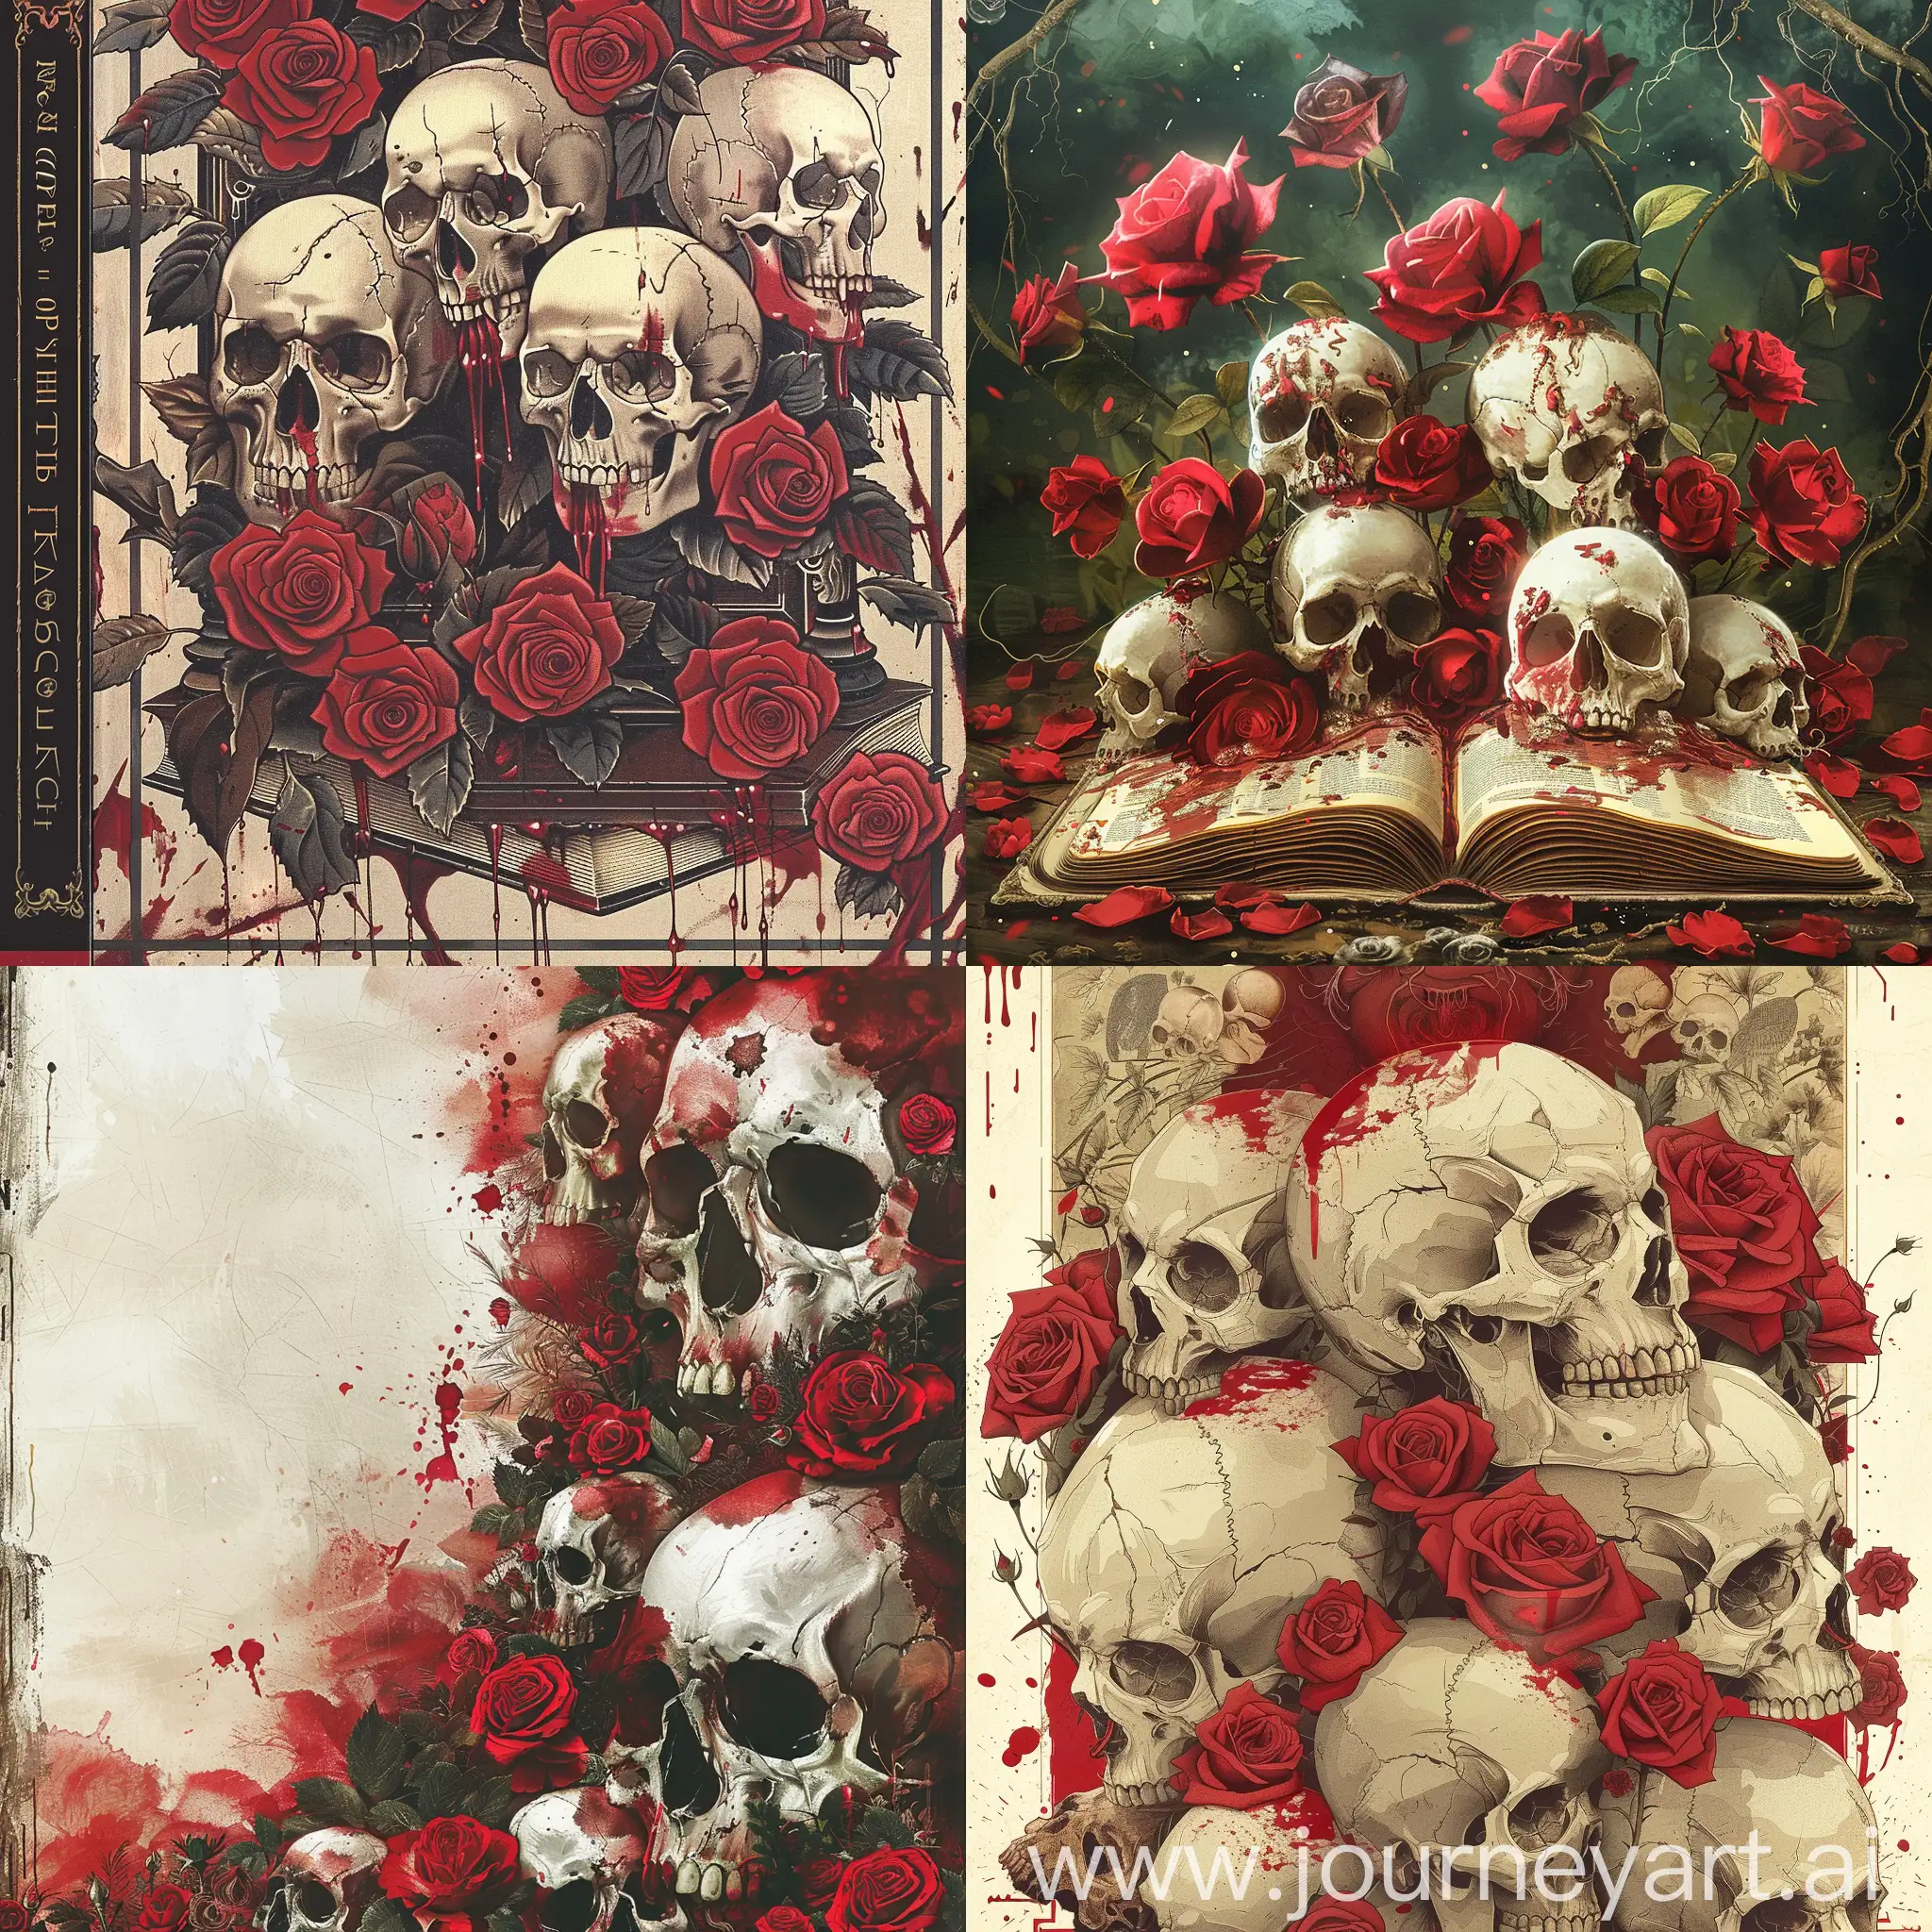  cover of a book with skulls and roses and blood